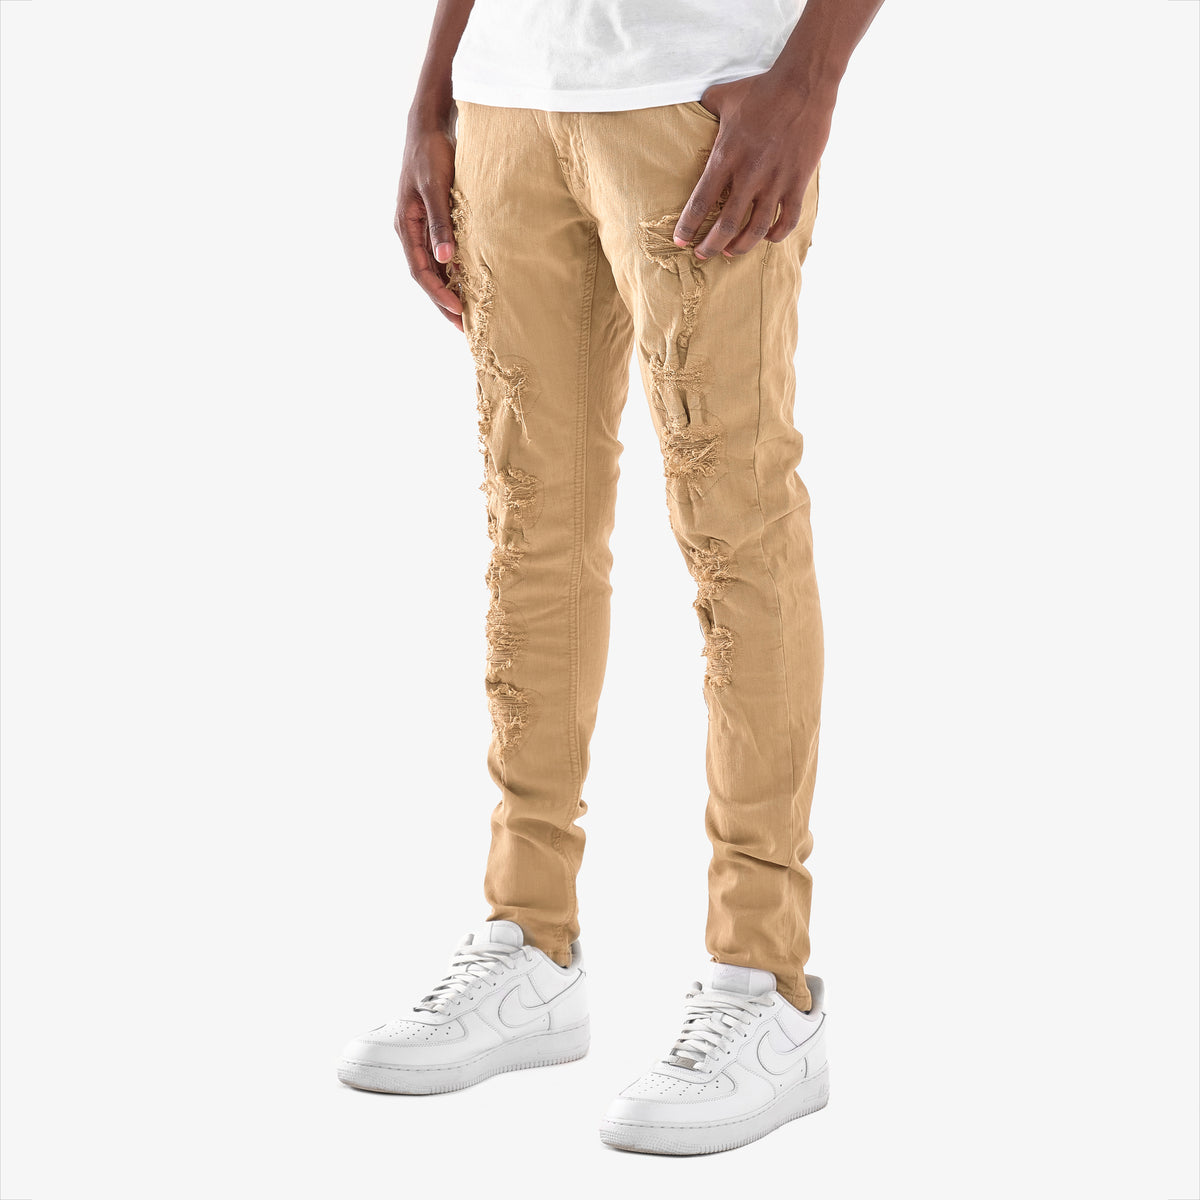 KHAKI PANTS WITH RIPS & PERMANENT WRINKLES